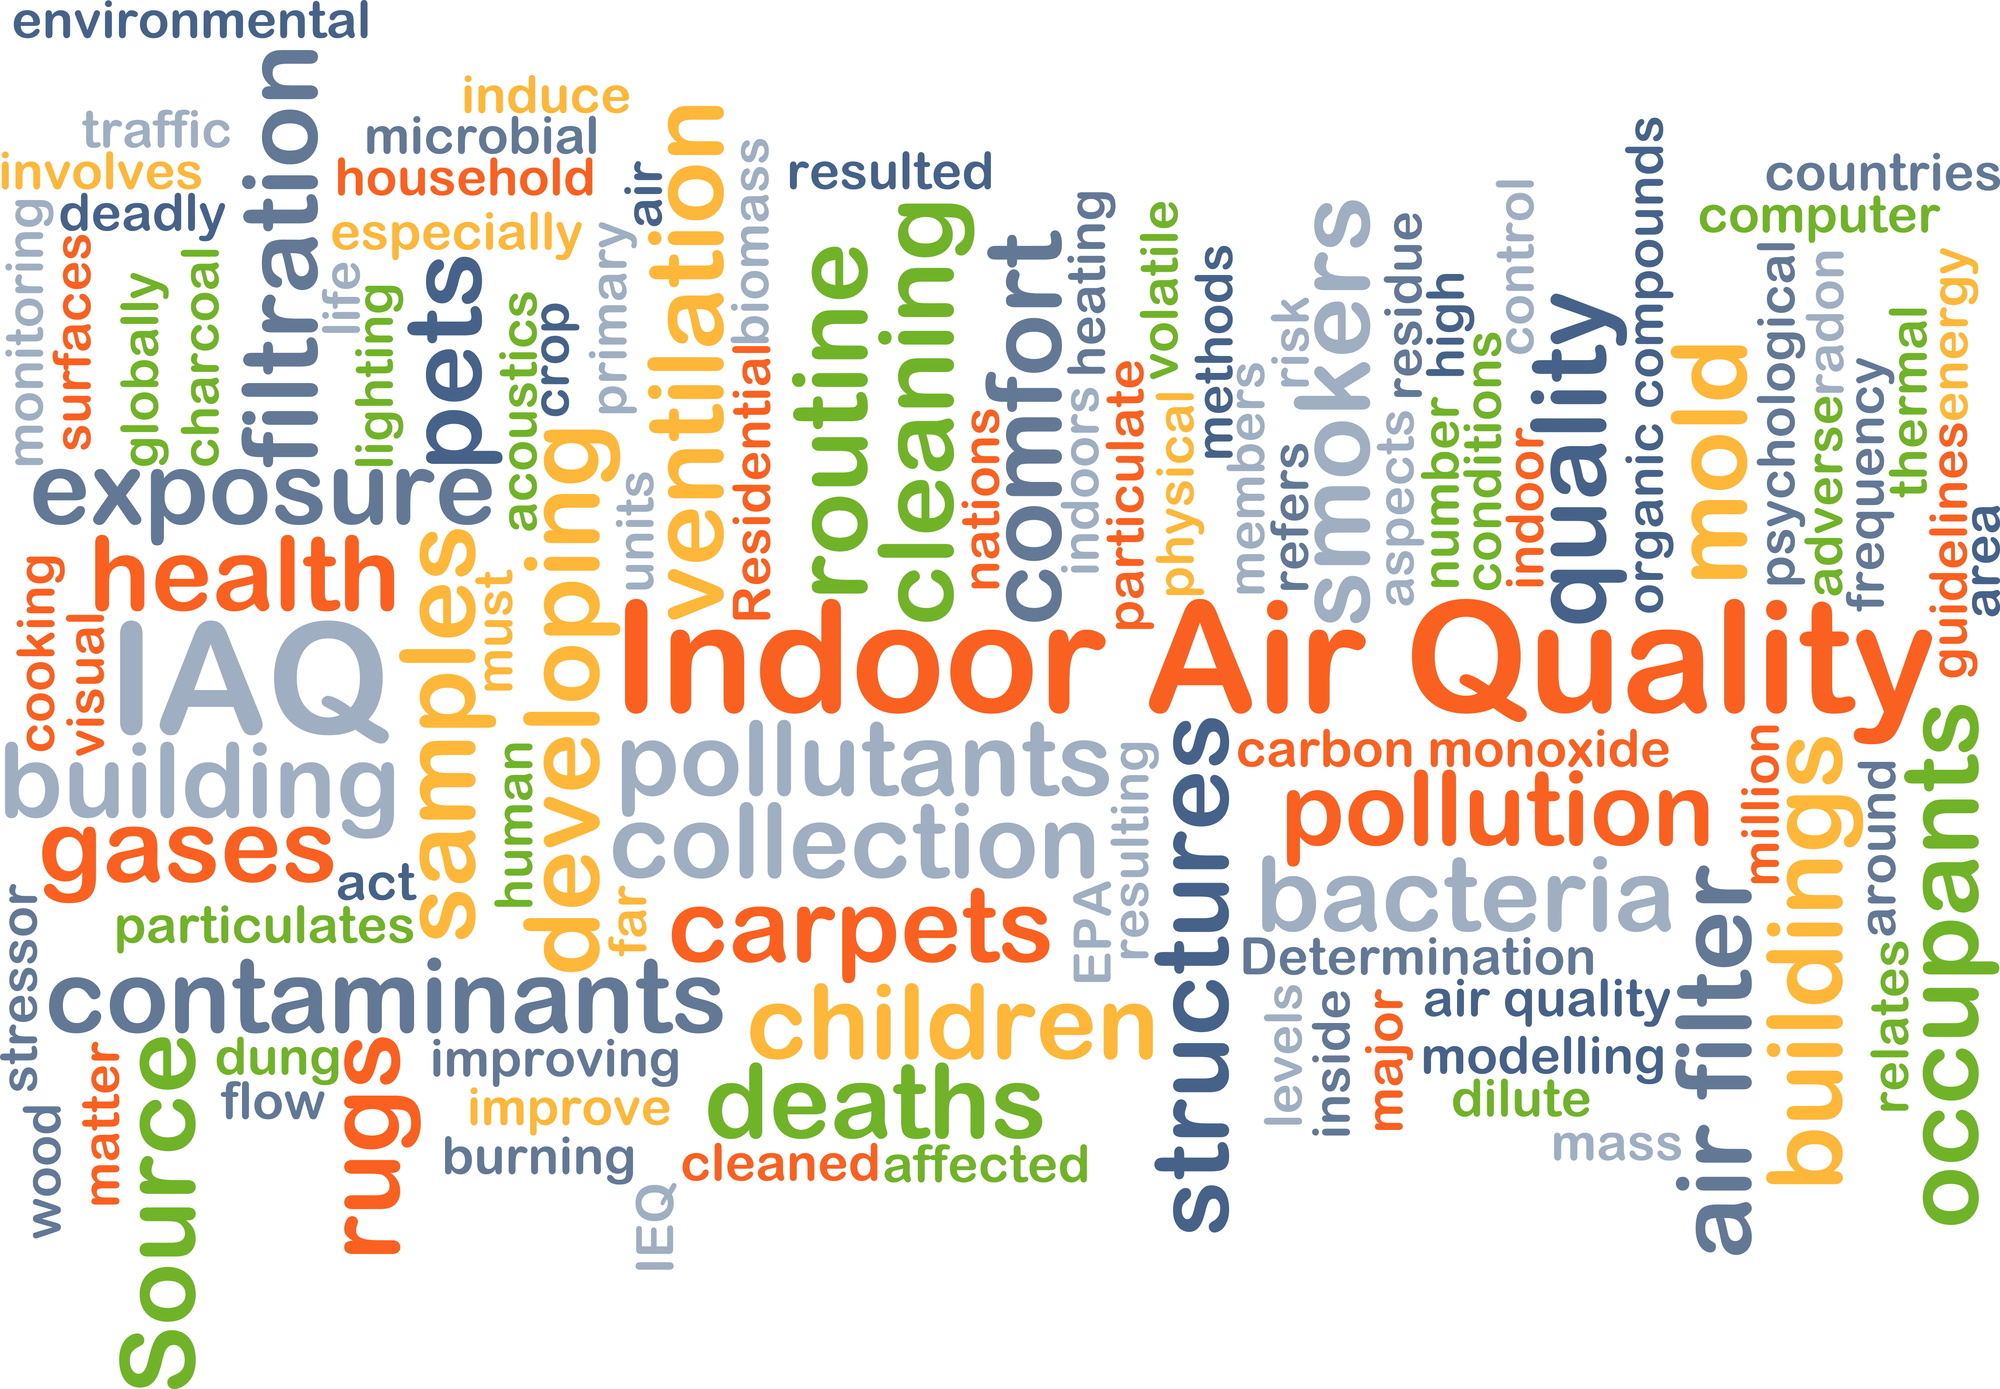 Are you noticing an increase in humidity, dust, and debris in your home? Get control of indoor air pollution by testing indoor air quality. Click here for more.